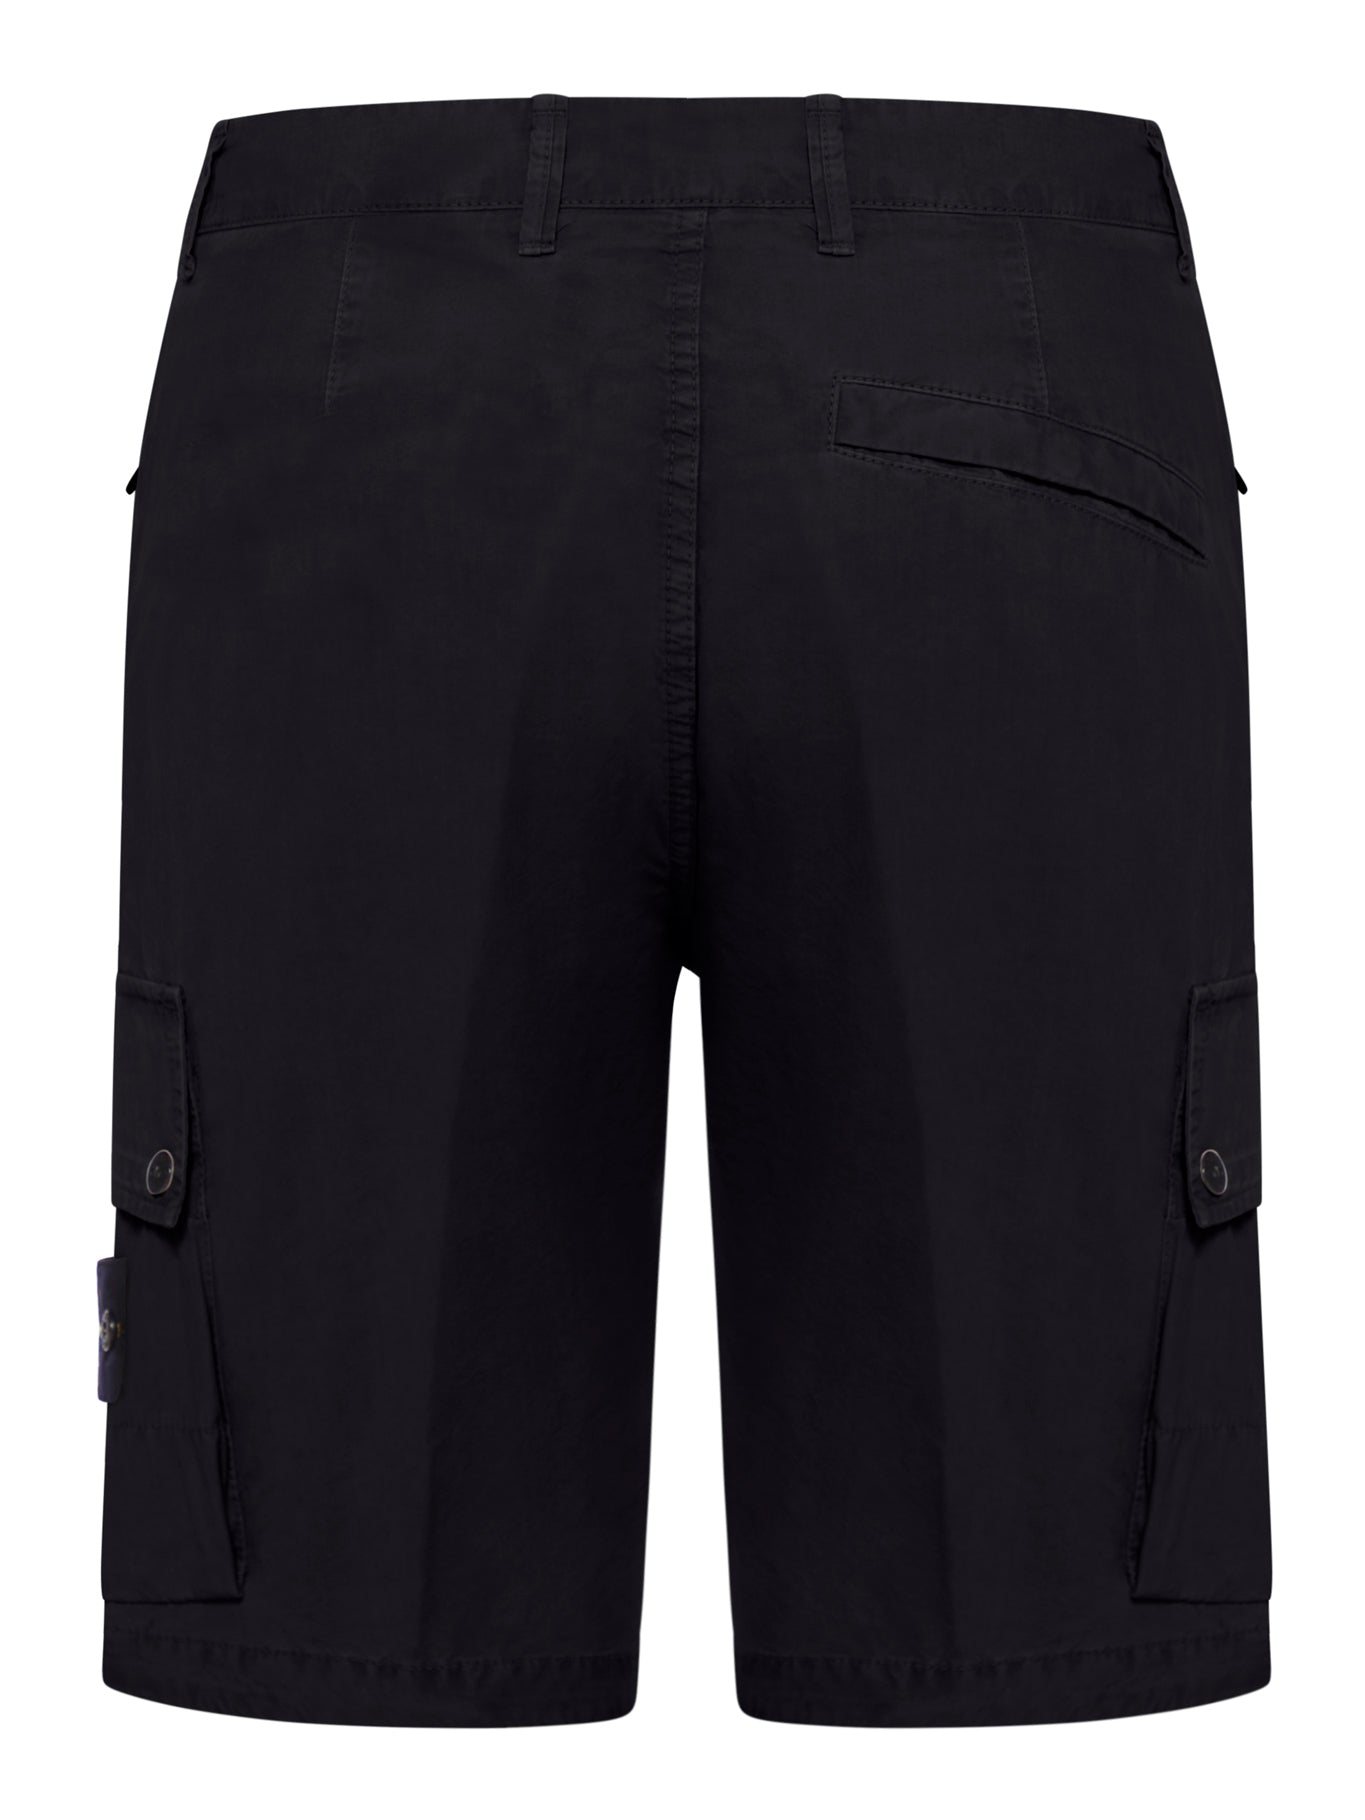 CARGO Bermuda shorts WITH LOGO PATCH AND POCKETS